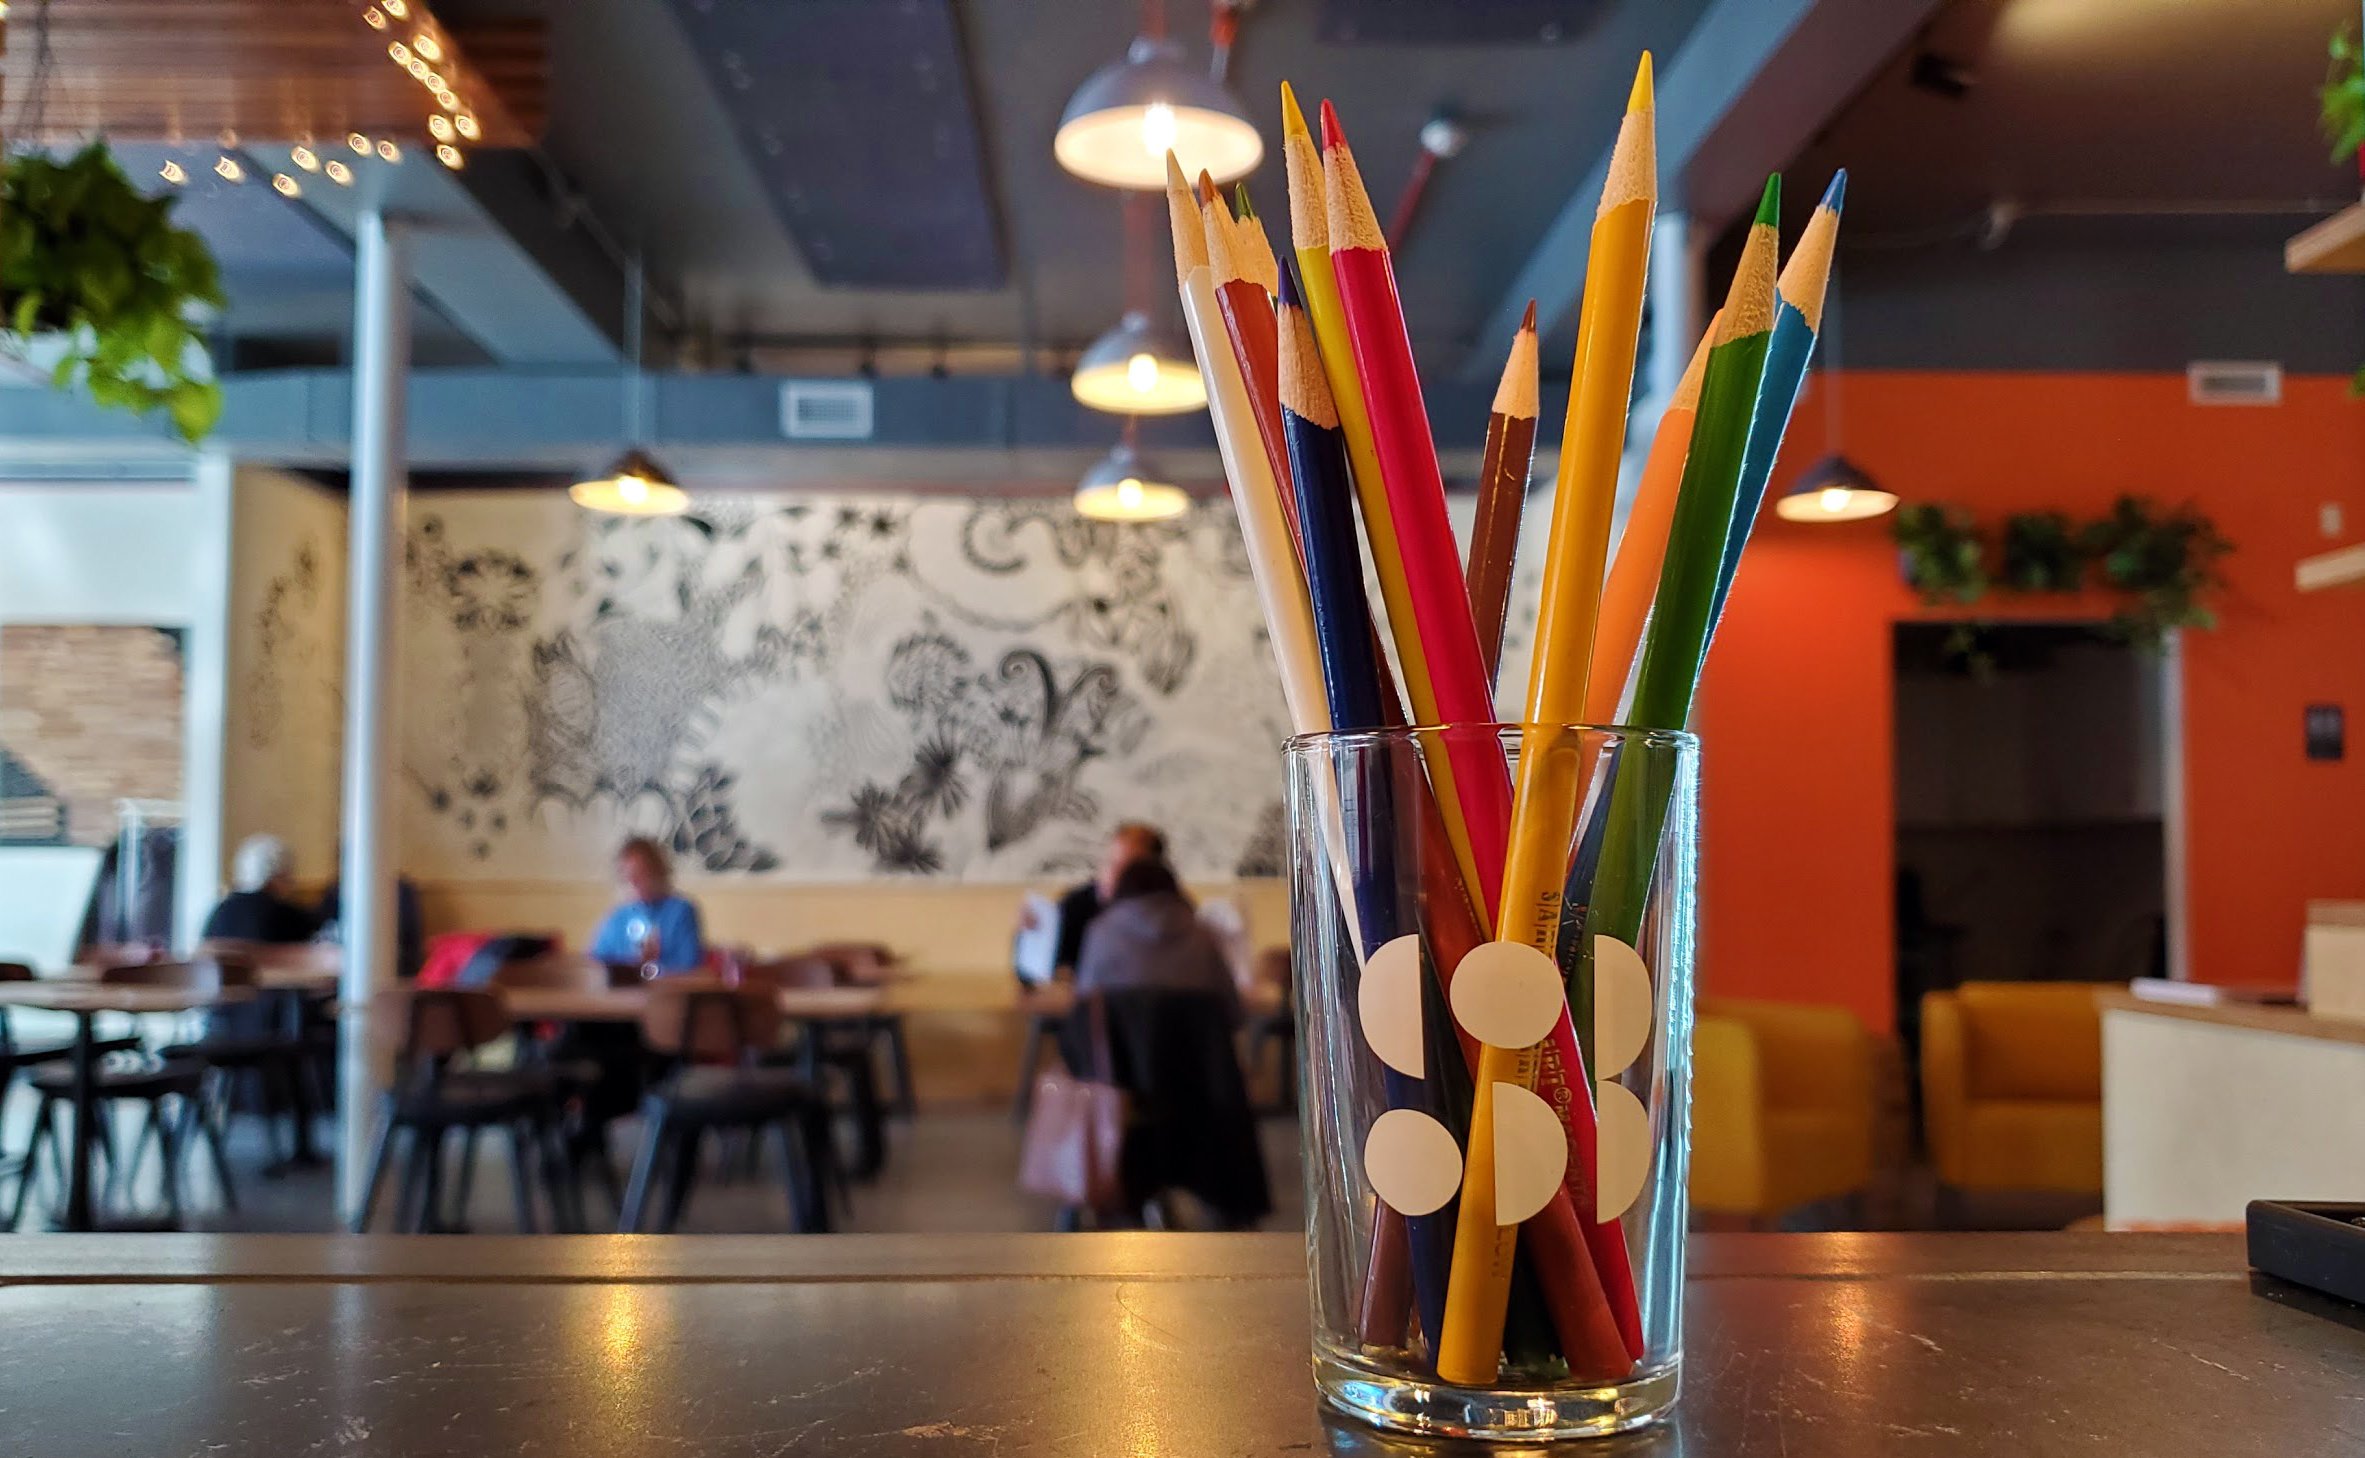  activities and artwork at evanston taproom and brewery 